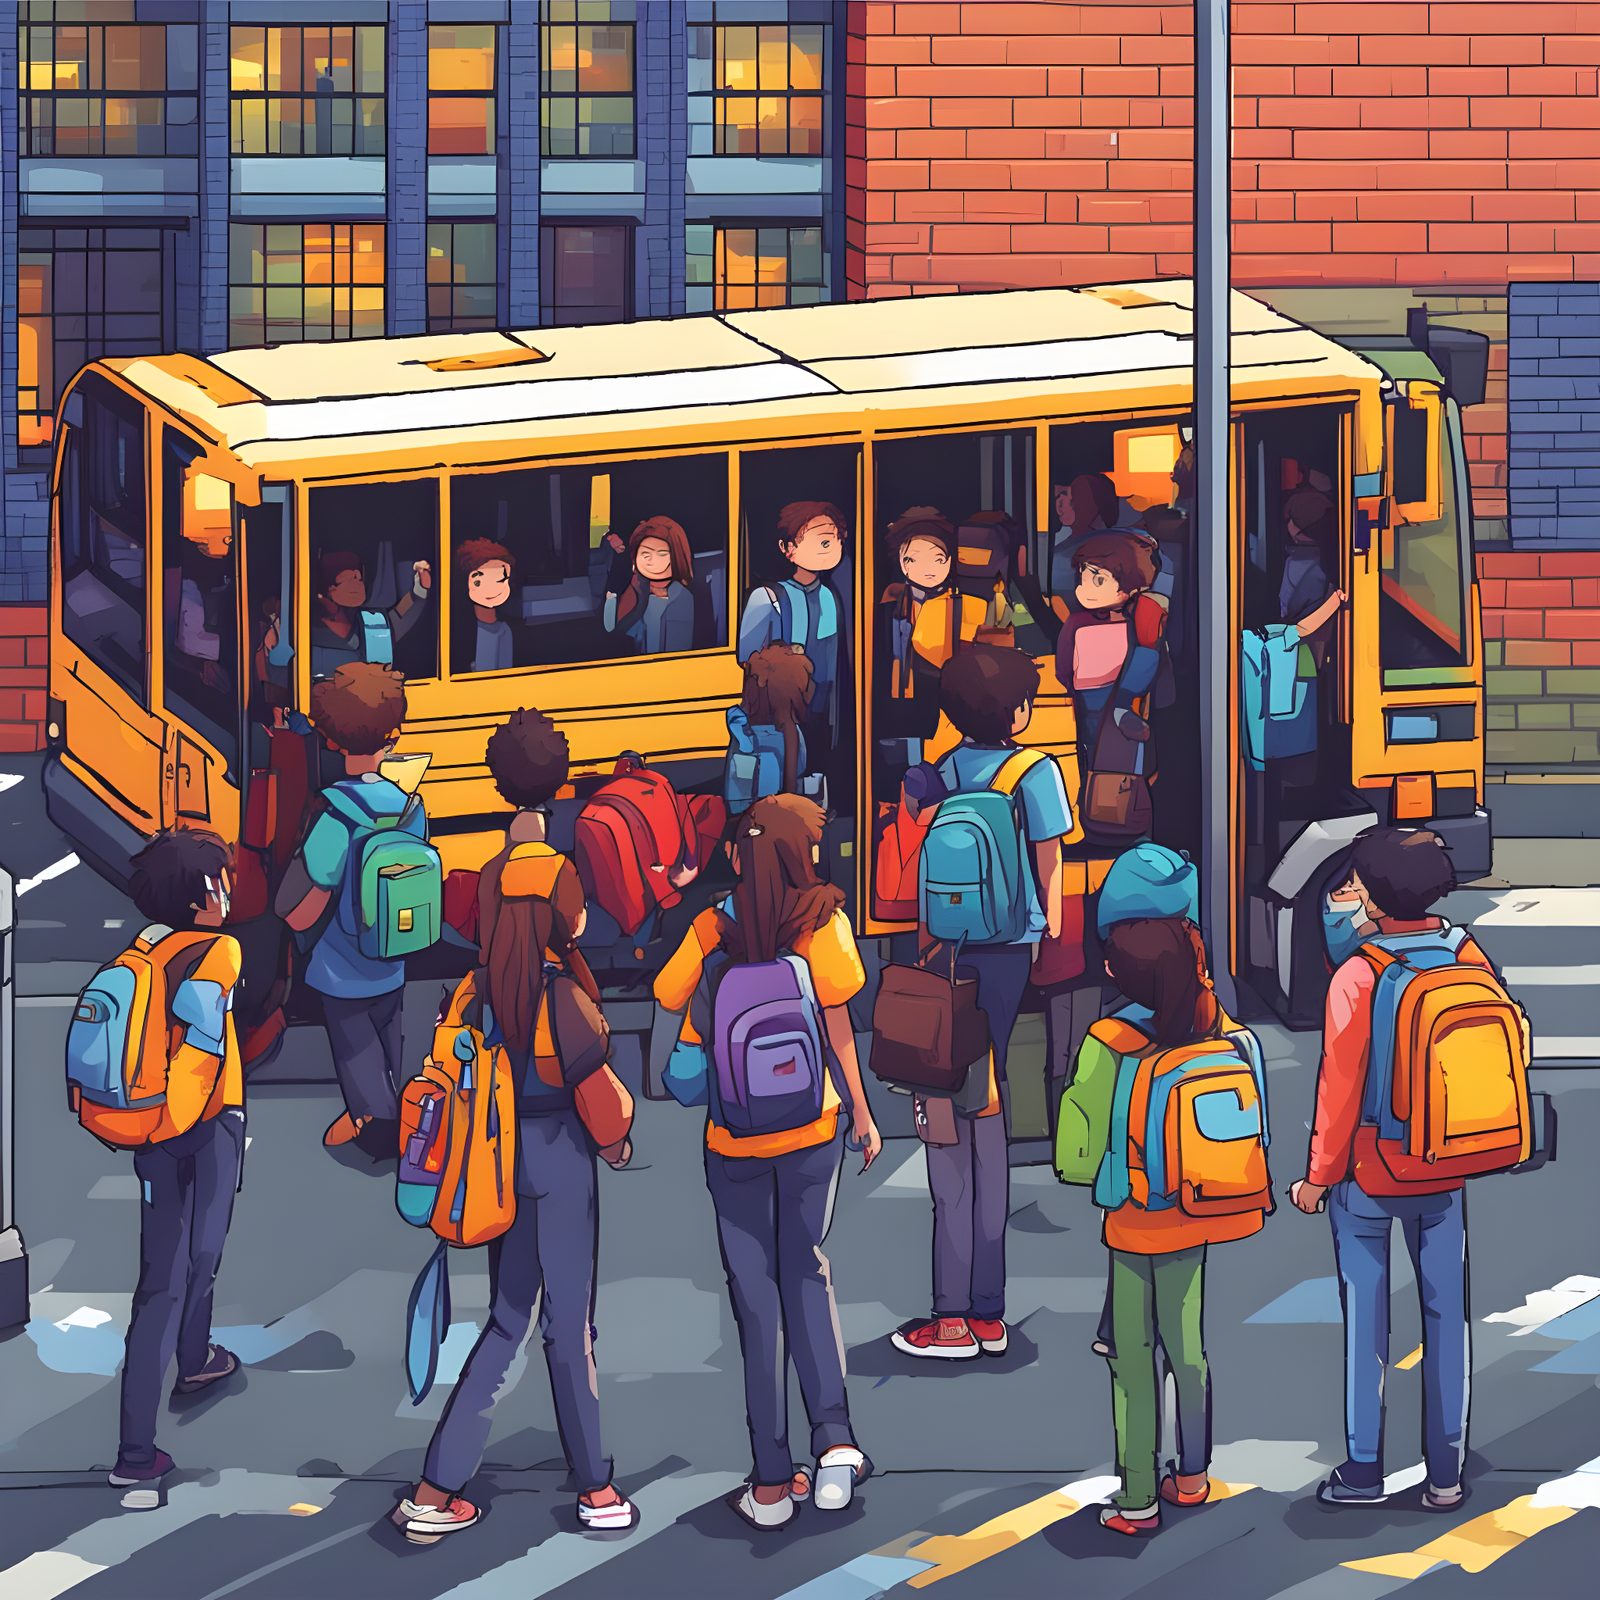 Head on to an IT Career! An image of diverse students eagerly waiting at a bus stop, backpacks on, with bright smiles, showcasing their excitement to go to school on a sunny morning.